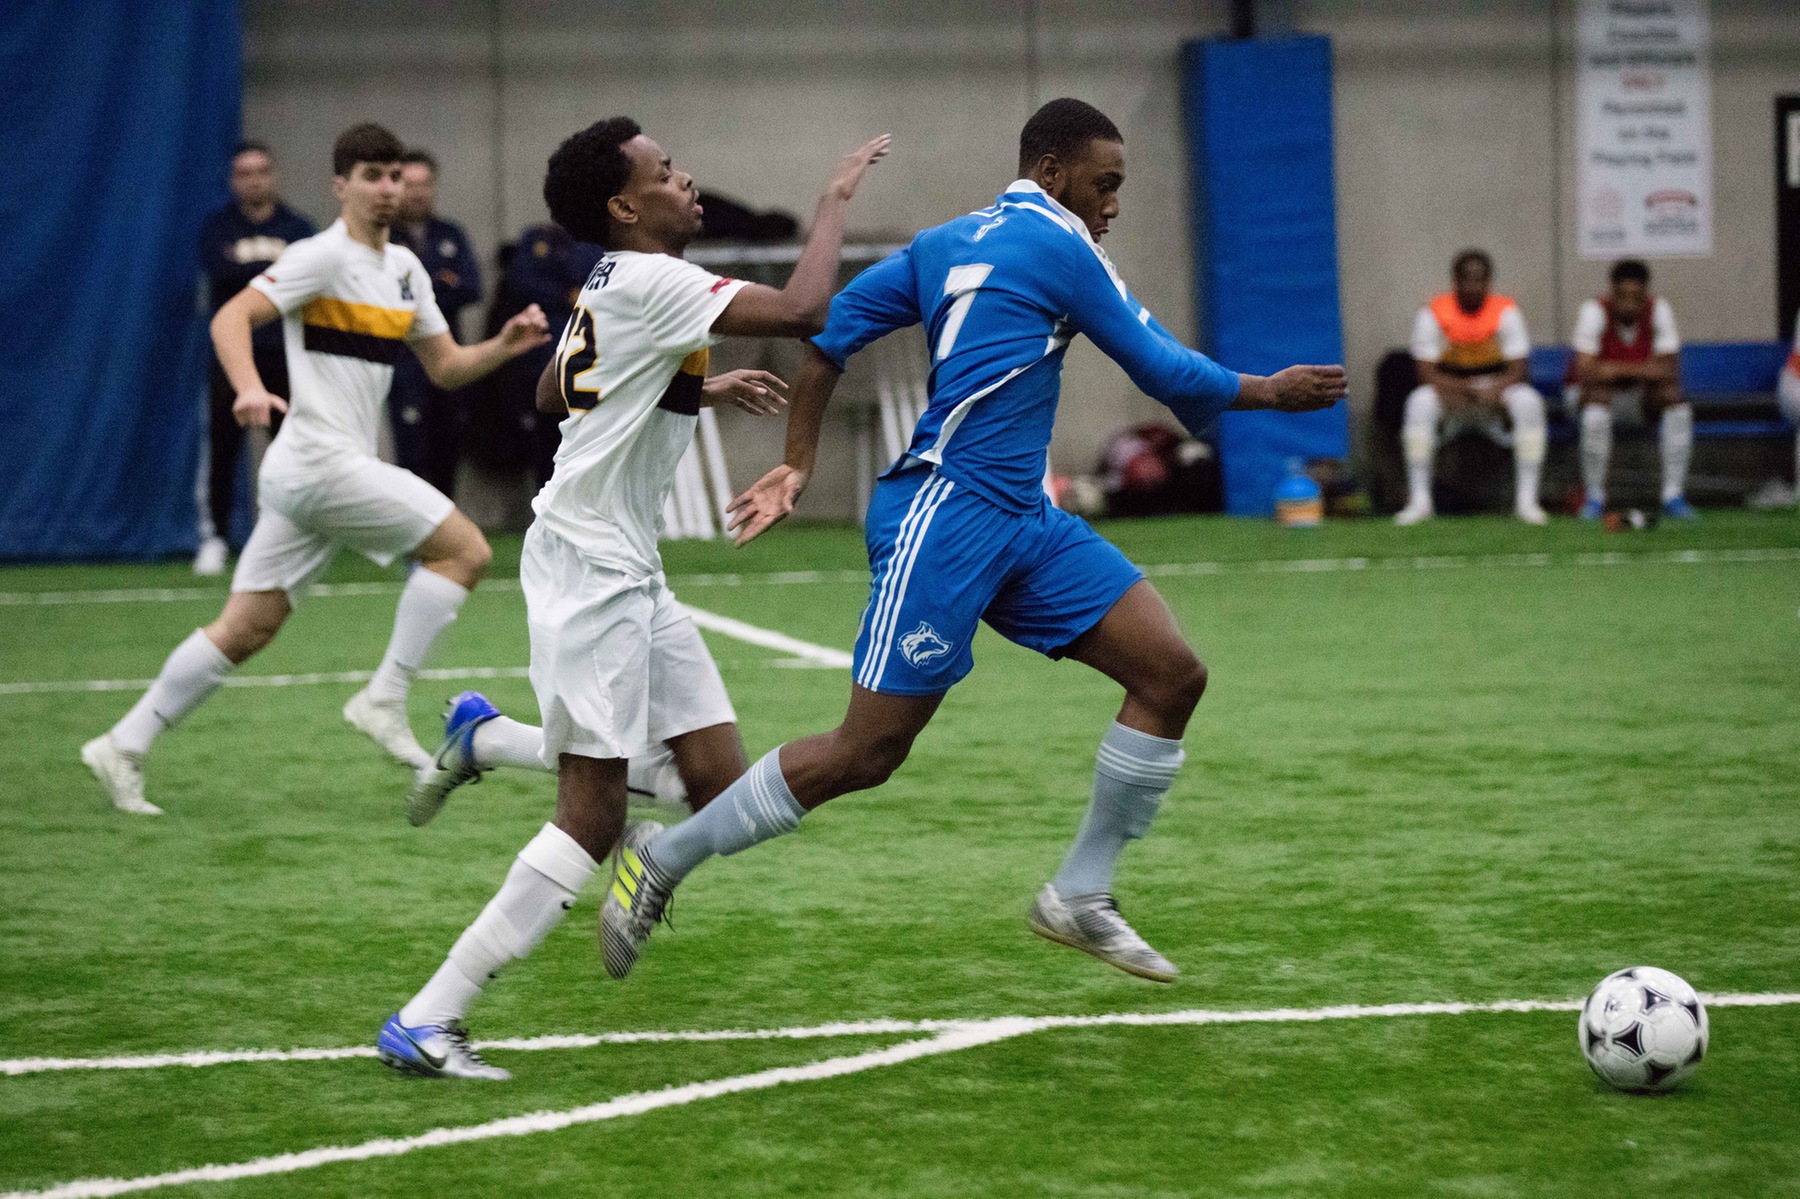 MEN'S INDOOR SOCCER ADVANCE TO OCAA CHAMPIONSHIPS SEMI-FINAL IN SEARCH OF FIFTH STRAIGHT MEDAL